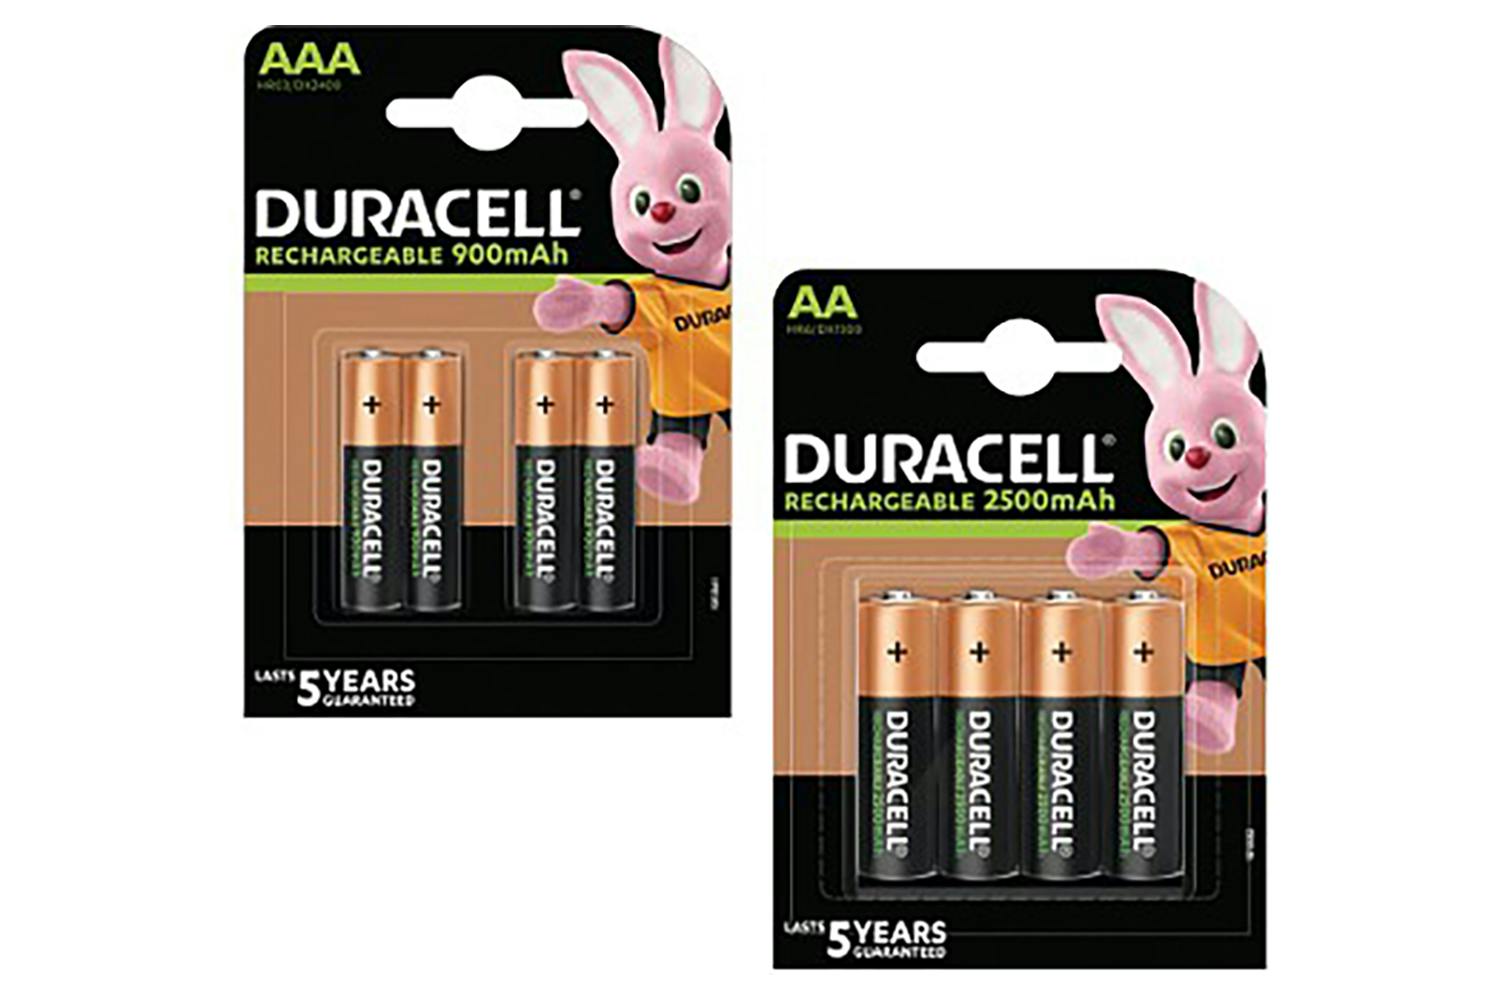 Duracell Rechargeable AA/AAA Battery | Packs of 4